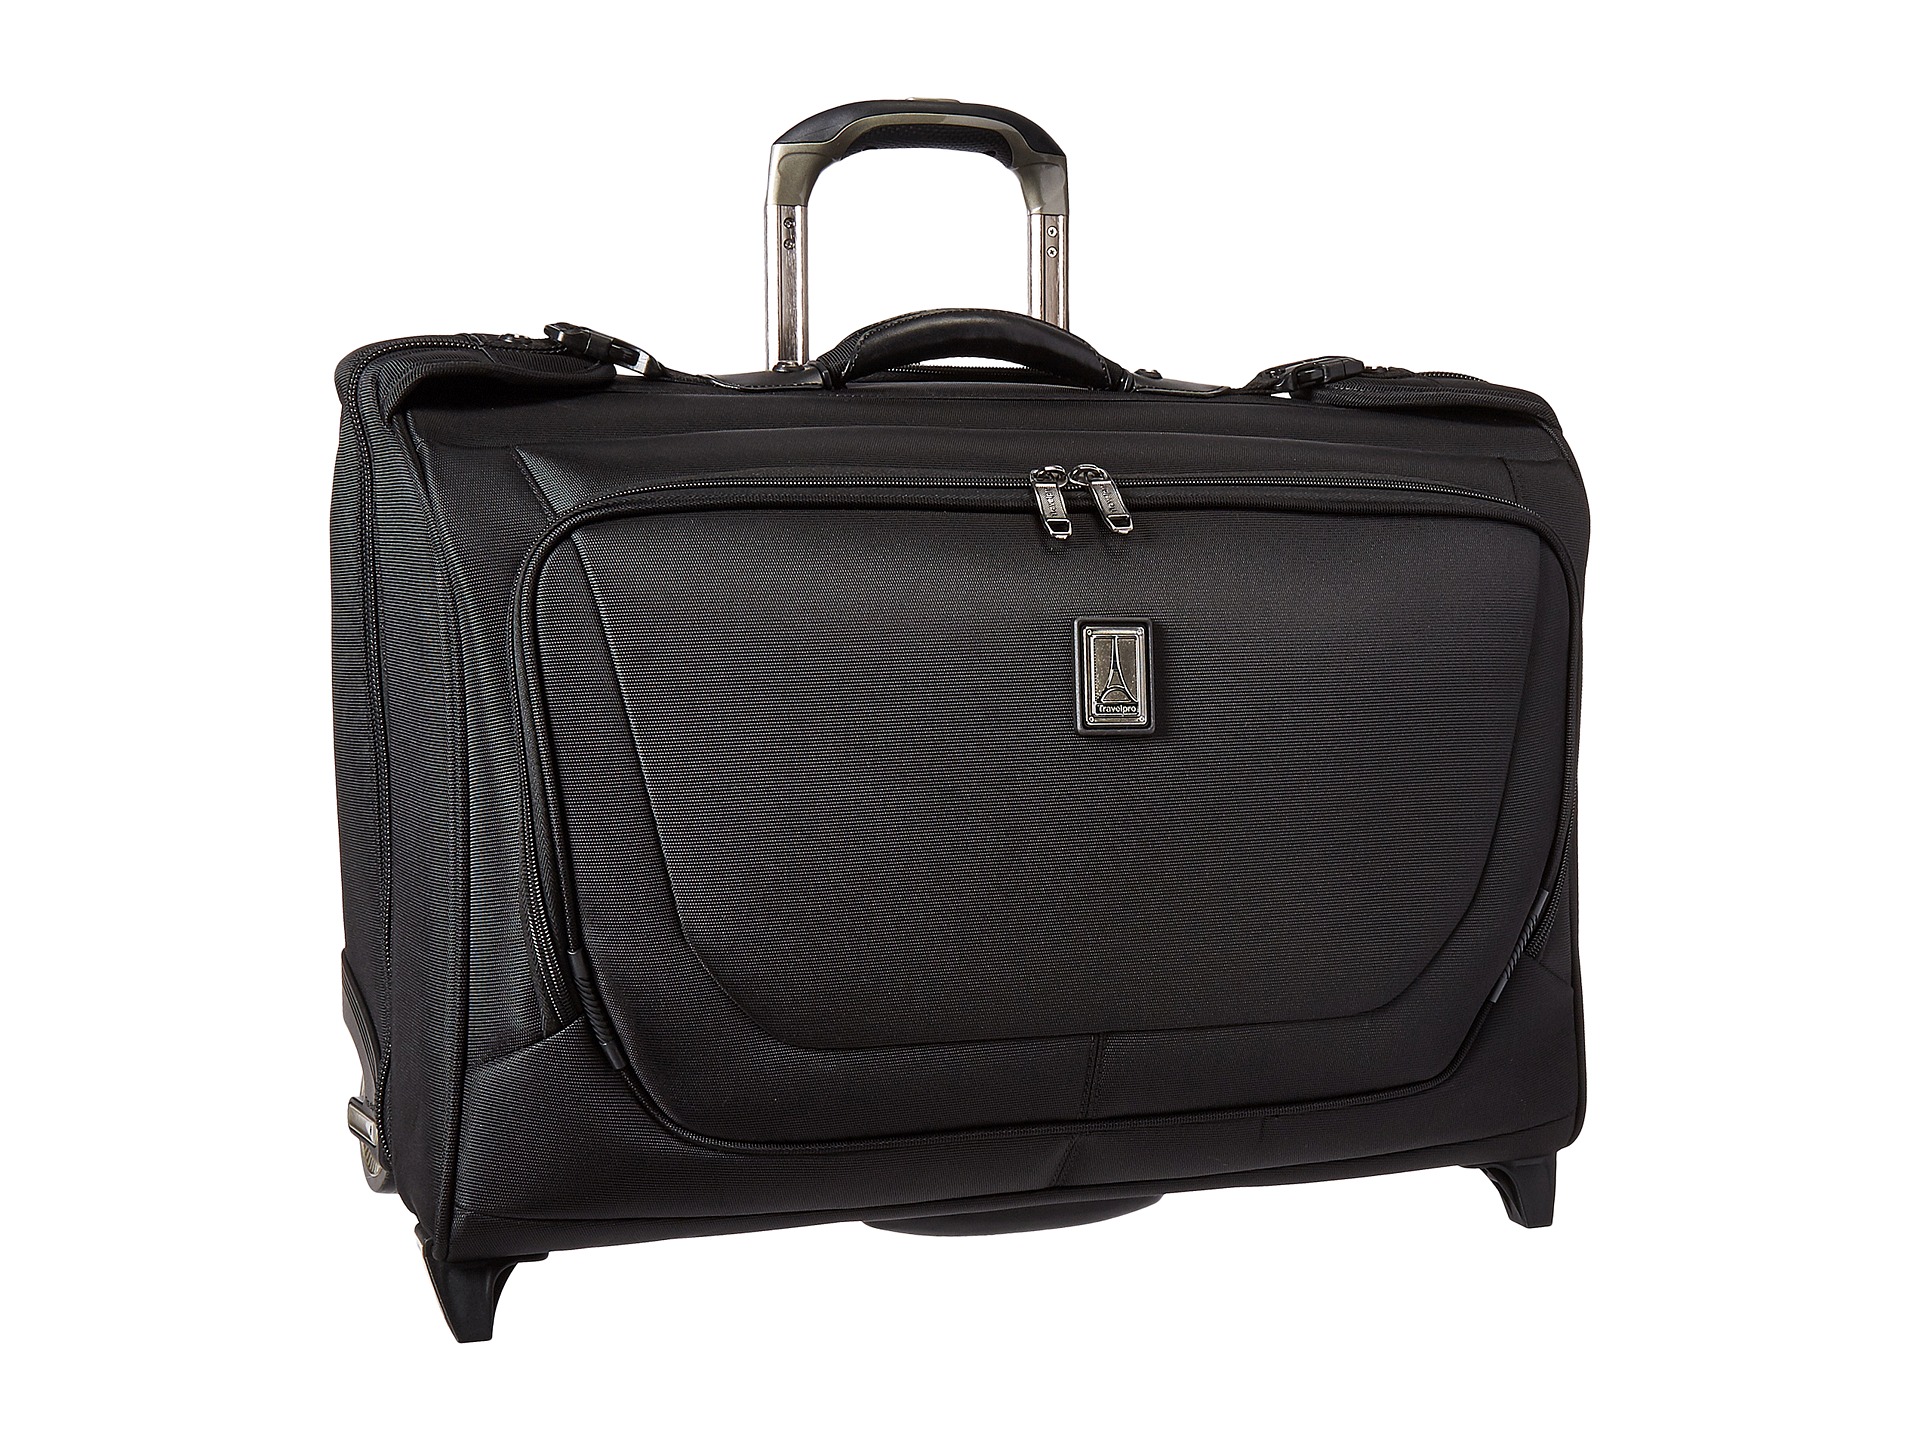 Travelpro Crew 11 - Carry-On Rolling Garment Bag at www.bagssaleusa.com